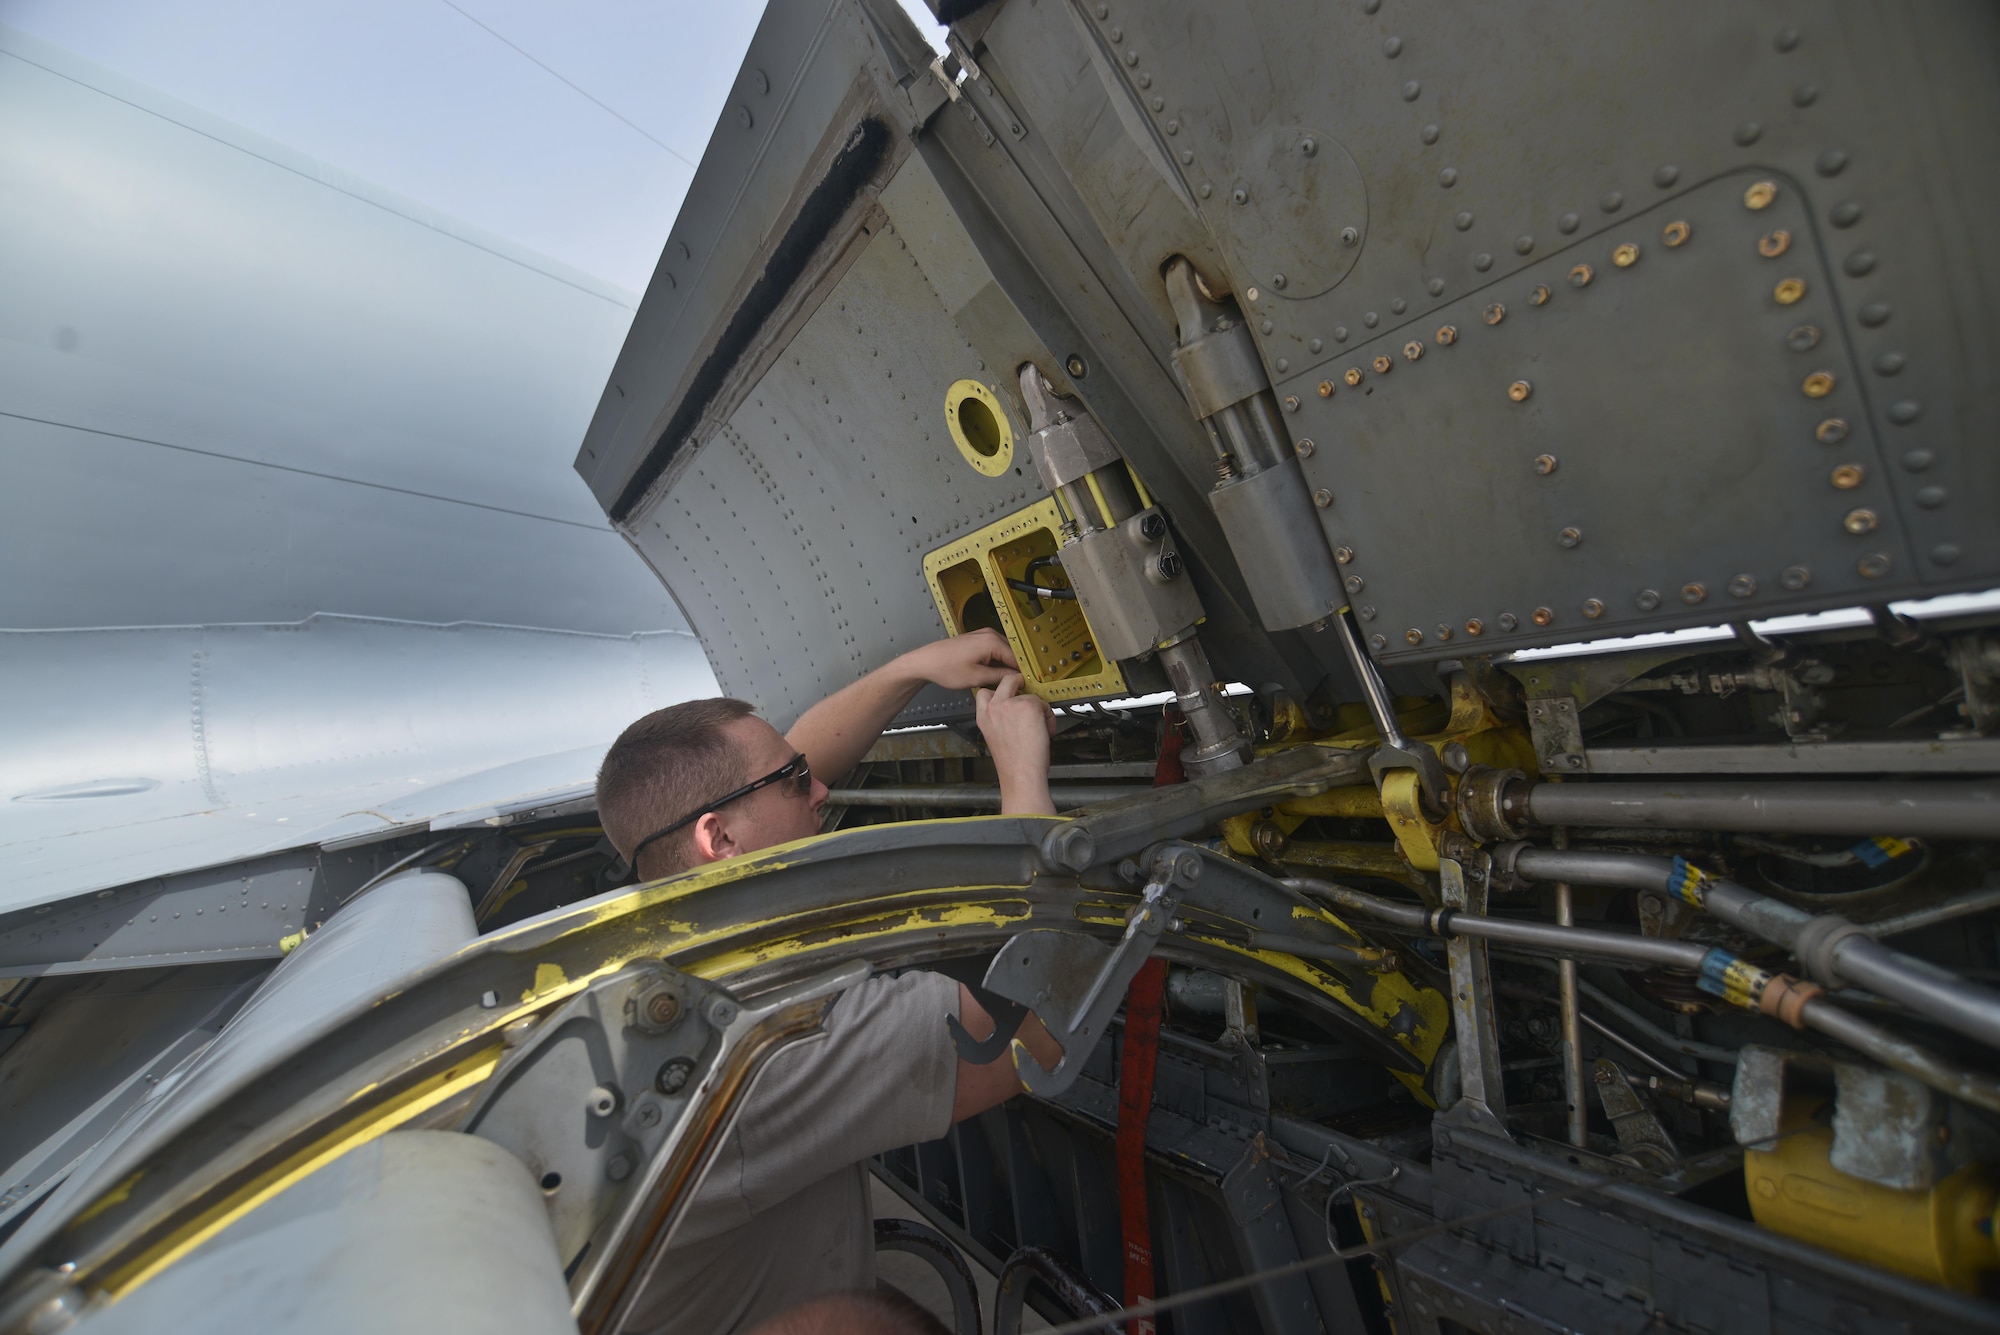 Senior Airman Adam Bentz, 379th Expeditionary Maintenance Squadron's fabrication flight, lines up a fabricated KC-135 Stratotanker spoiler access panel part for new rivets August 4, 2015 at Al Udeid Air Base, Qatar. The fabrications flight is partitioned into the aircraft structural maintenance and metal technology sections that make on-site repairs to aircraft deployed to Al Udeid. Most fabrications can be conducted on the flight line. For others, Airmen would bring in the part or create what is needed to keep the aircraft flying within hours. (U.S. Air Force photo/ Staff Sgt. Alexandre Montes)